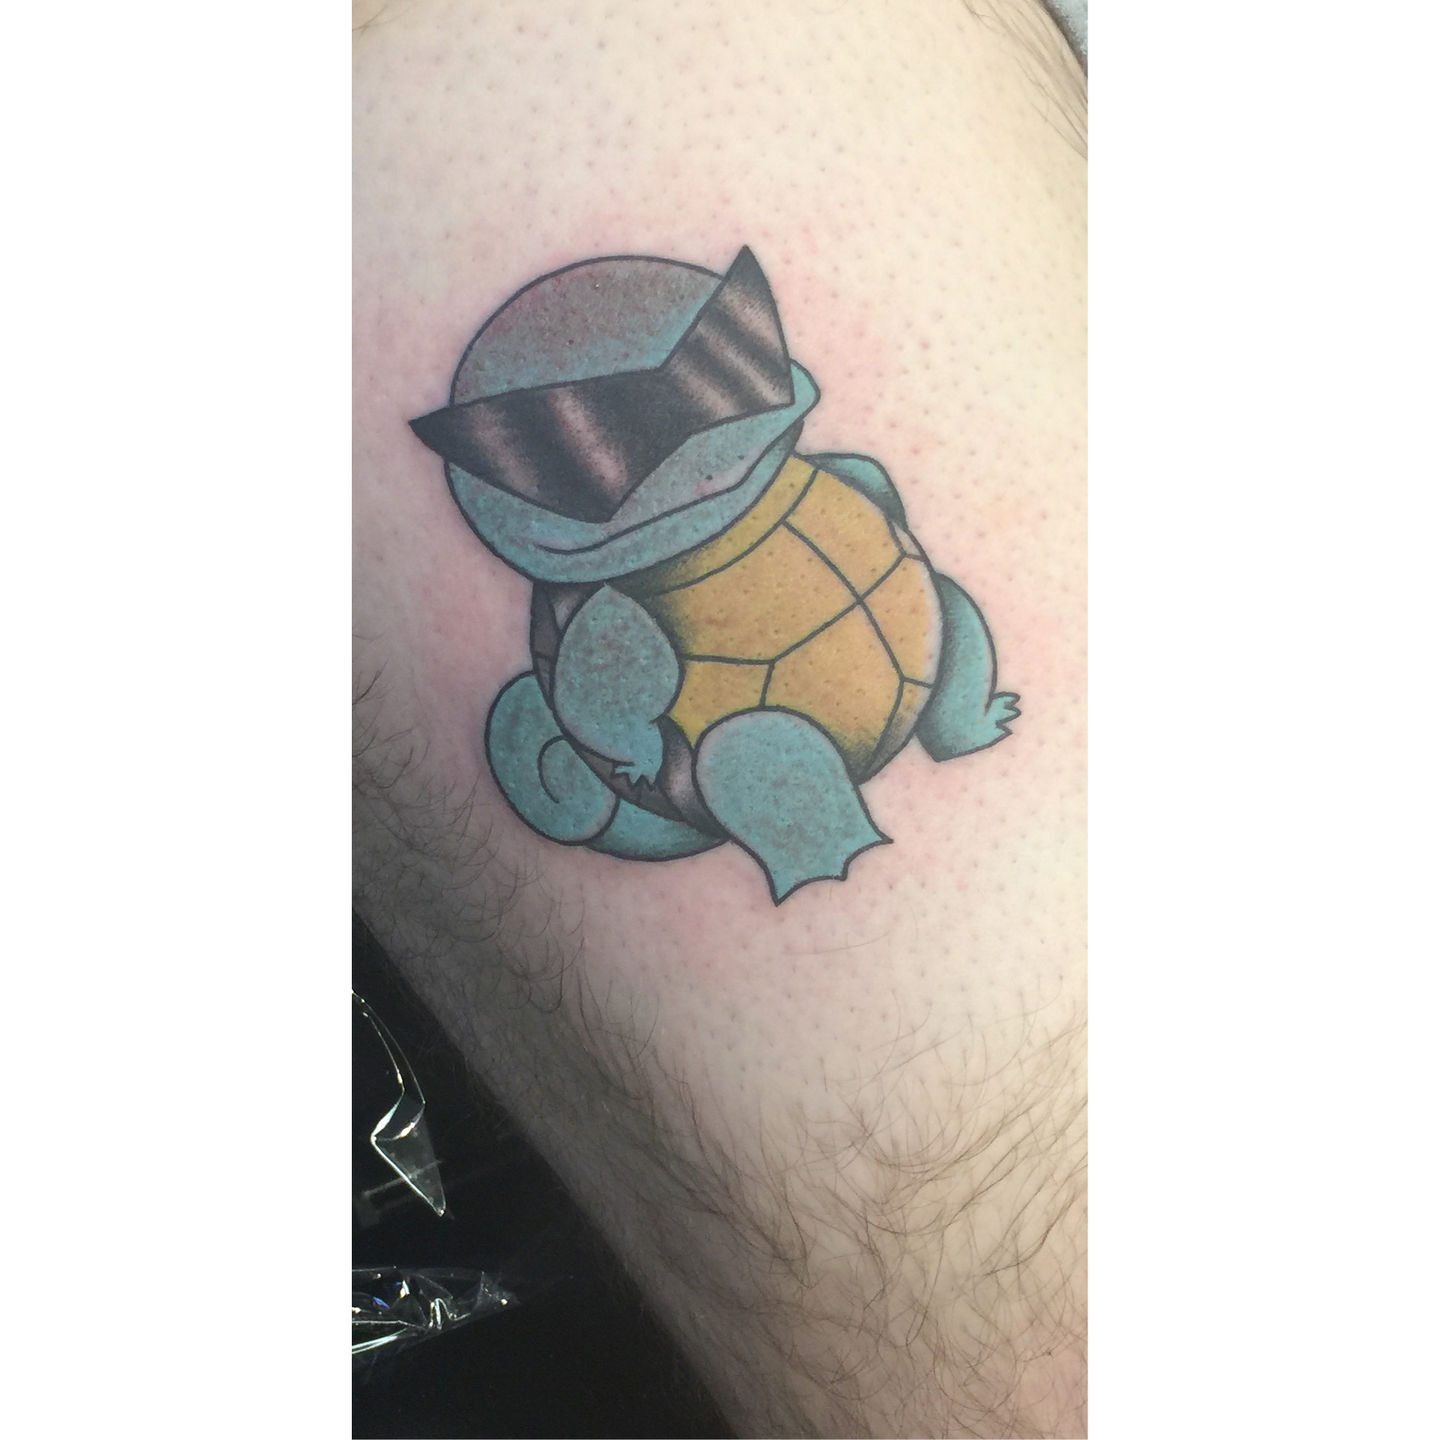 Latest Squirtle Tattoos | Find Squirtle Tattoos